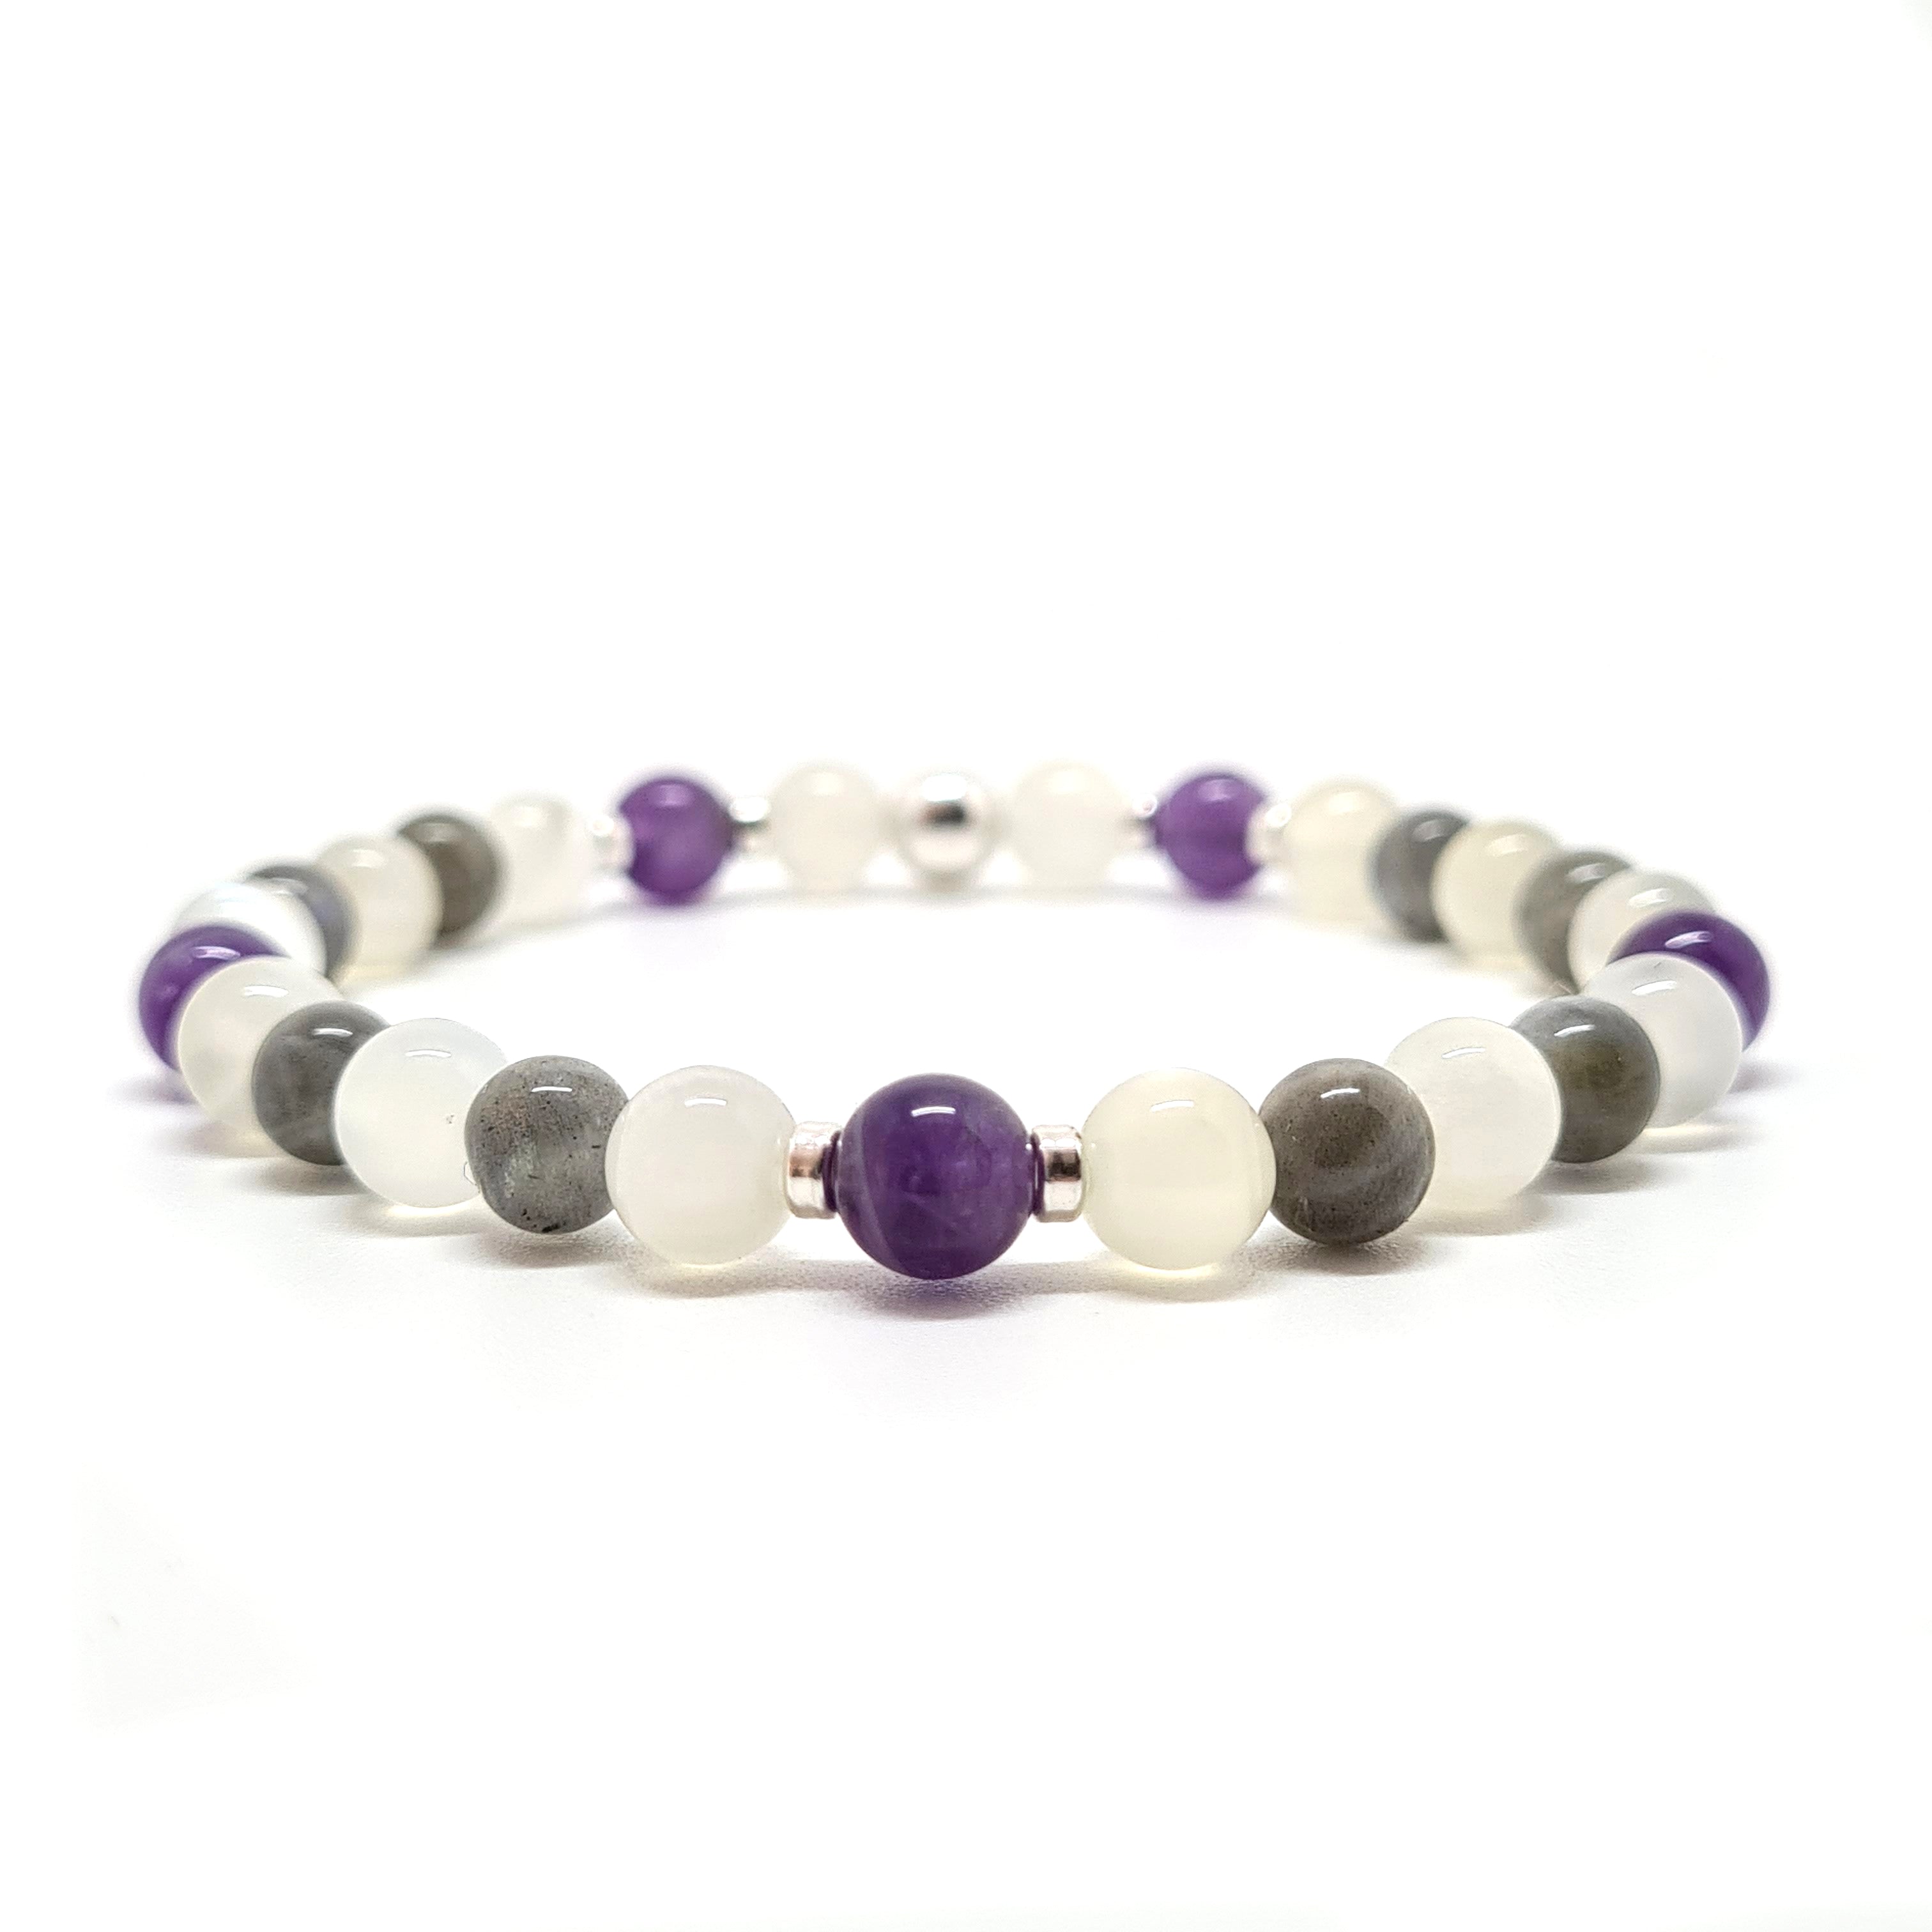 6mm Labradorite, Moonstone and amethyst gemstone bracelet with 925 Silver accessories 